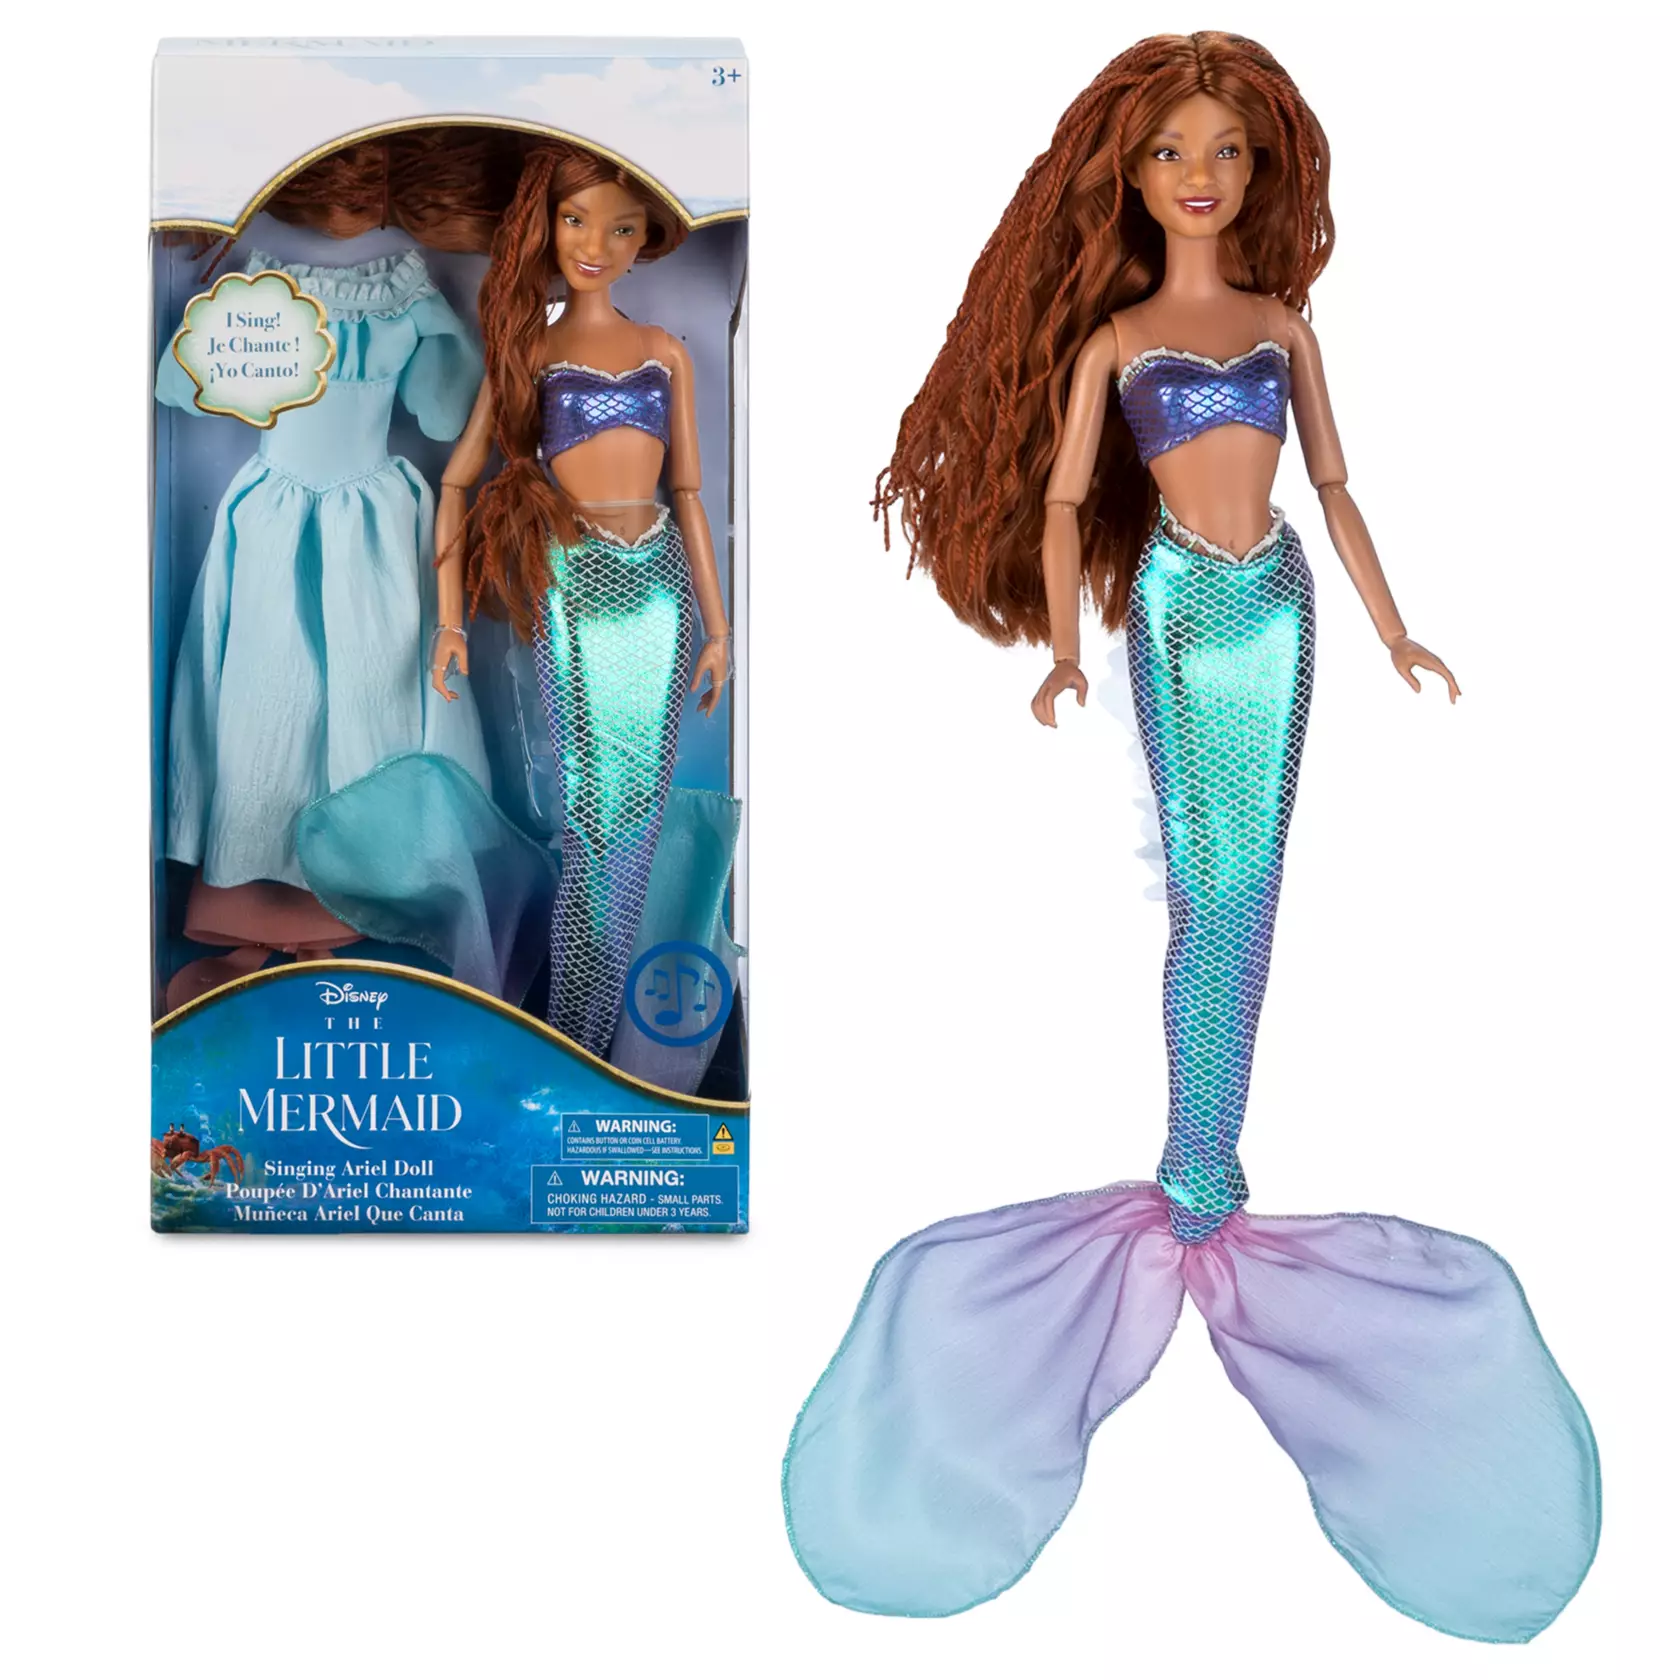 The Little Mermaid Deluxe Doll 2023